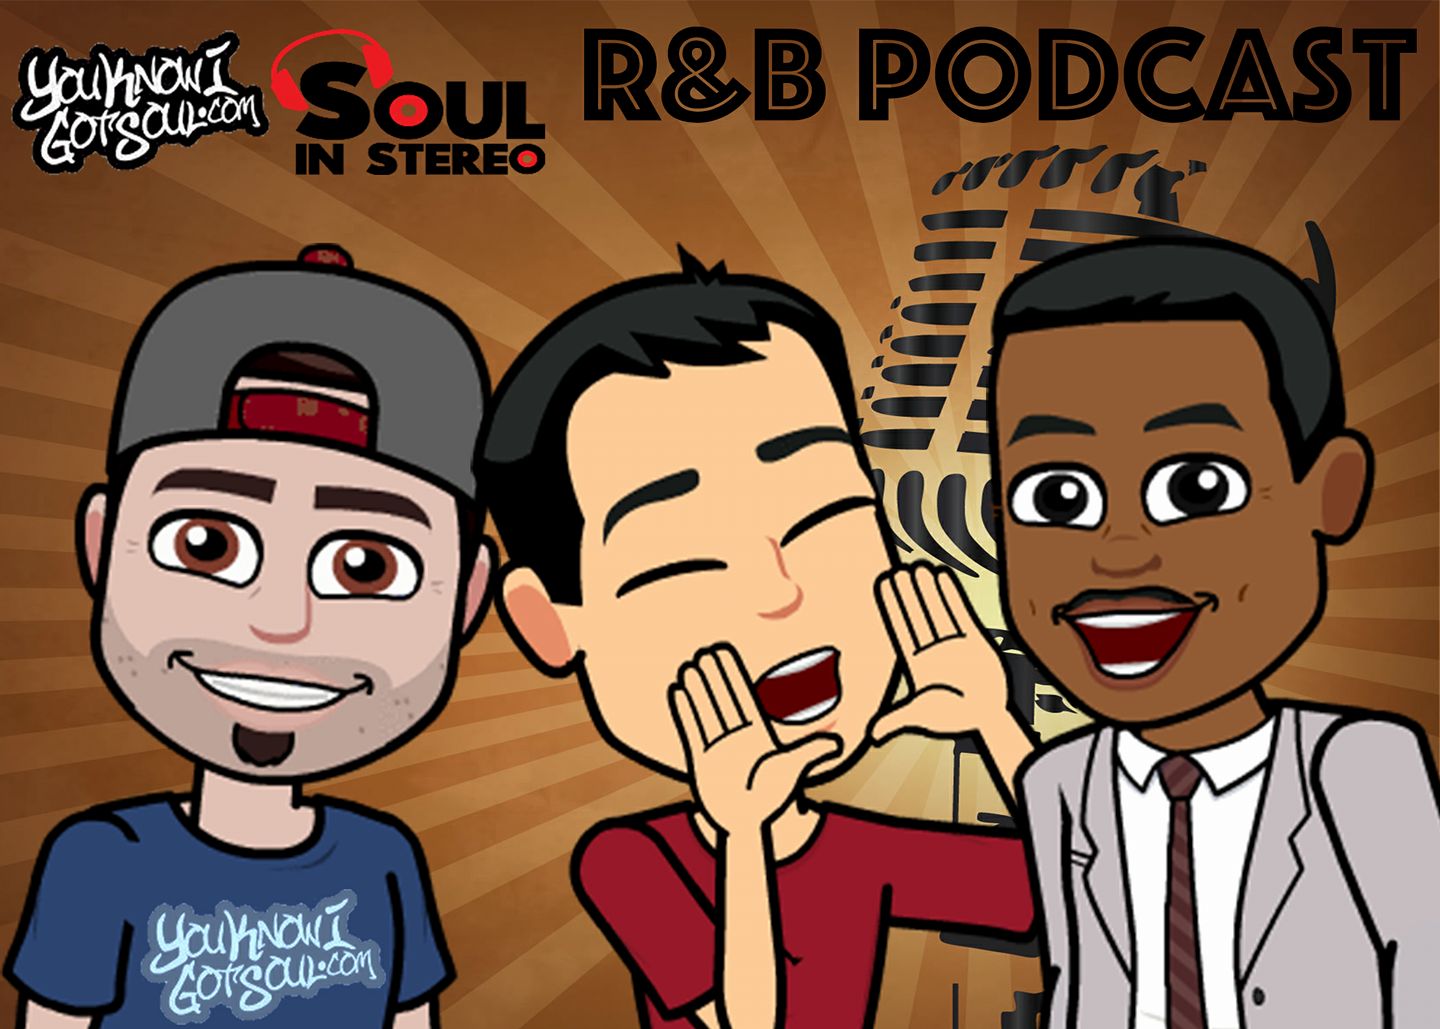 Our Halloween Consisted Of 45 Damn Chris Brown Songs – YouKnowIGotSoul R&B Podcast Episode #68